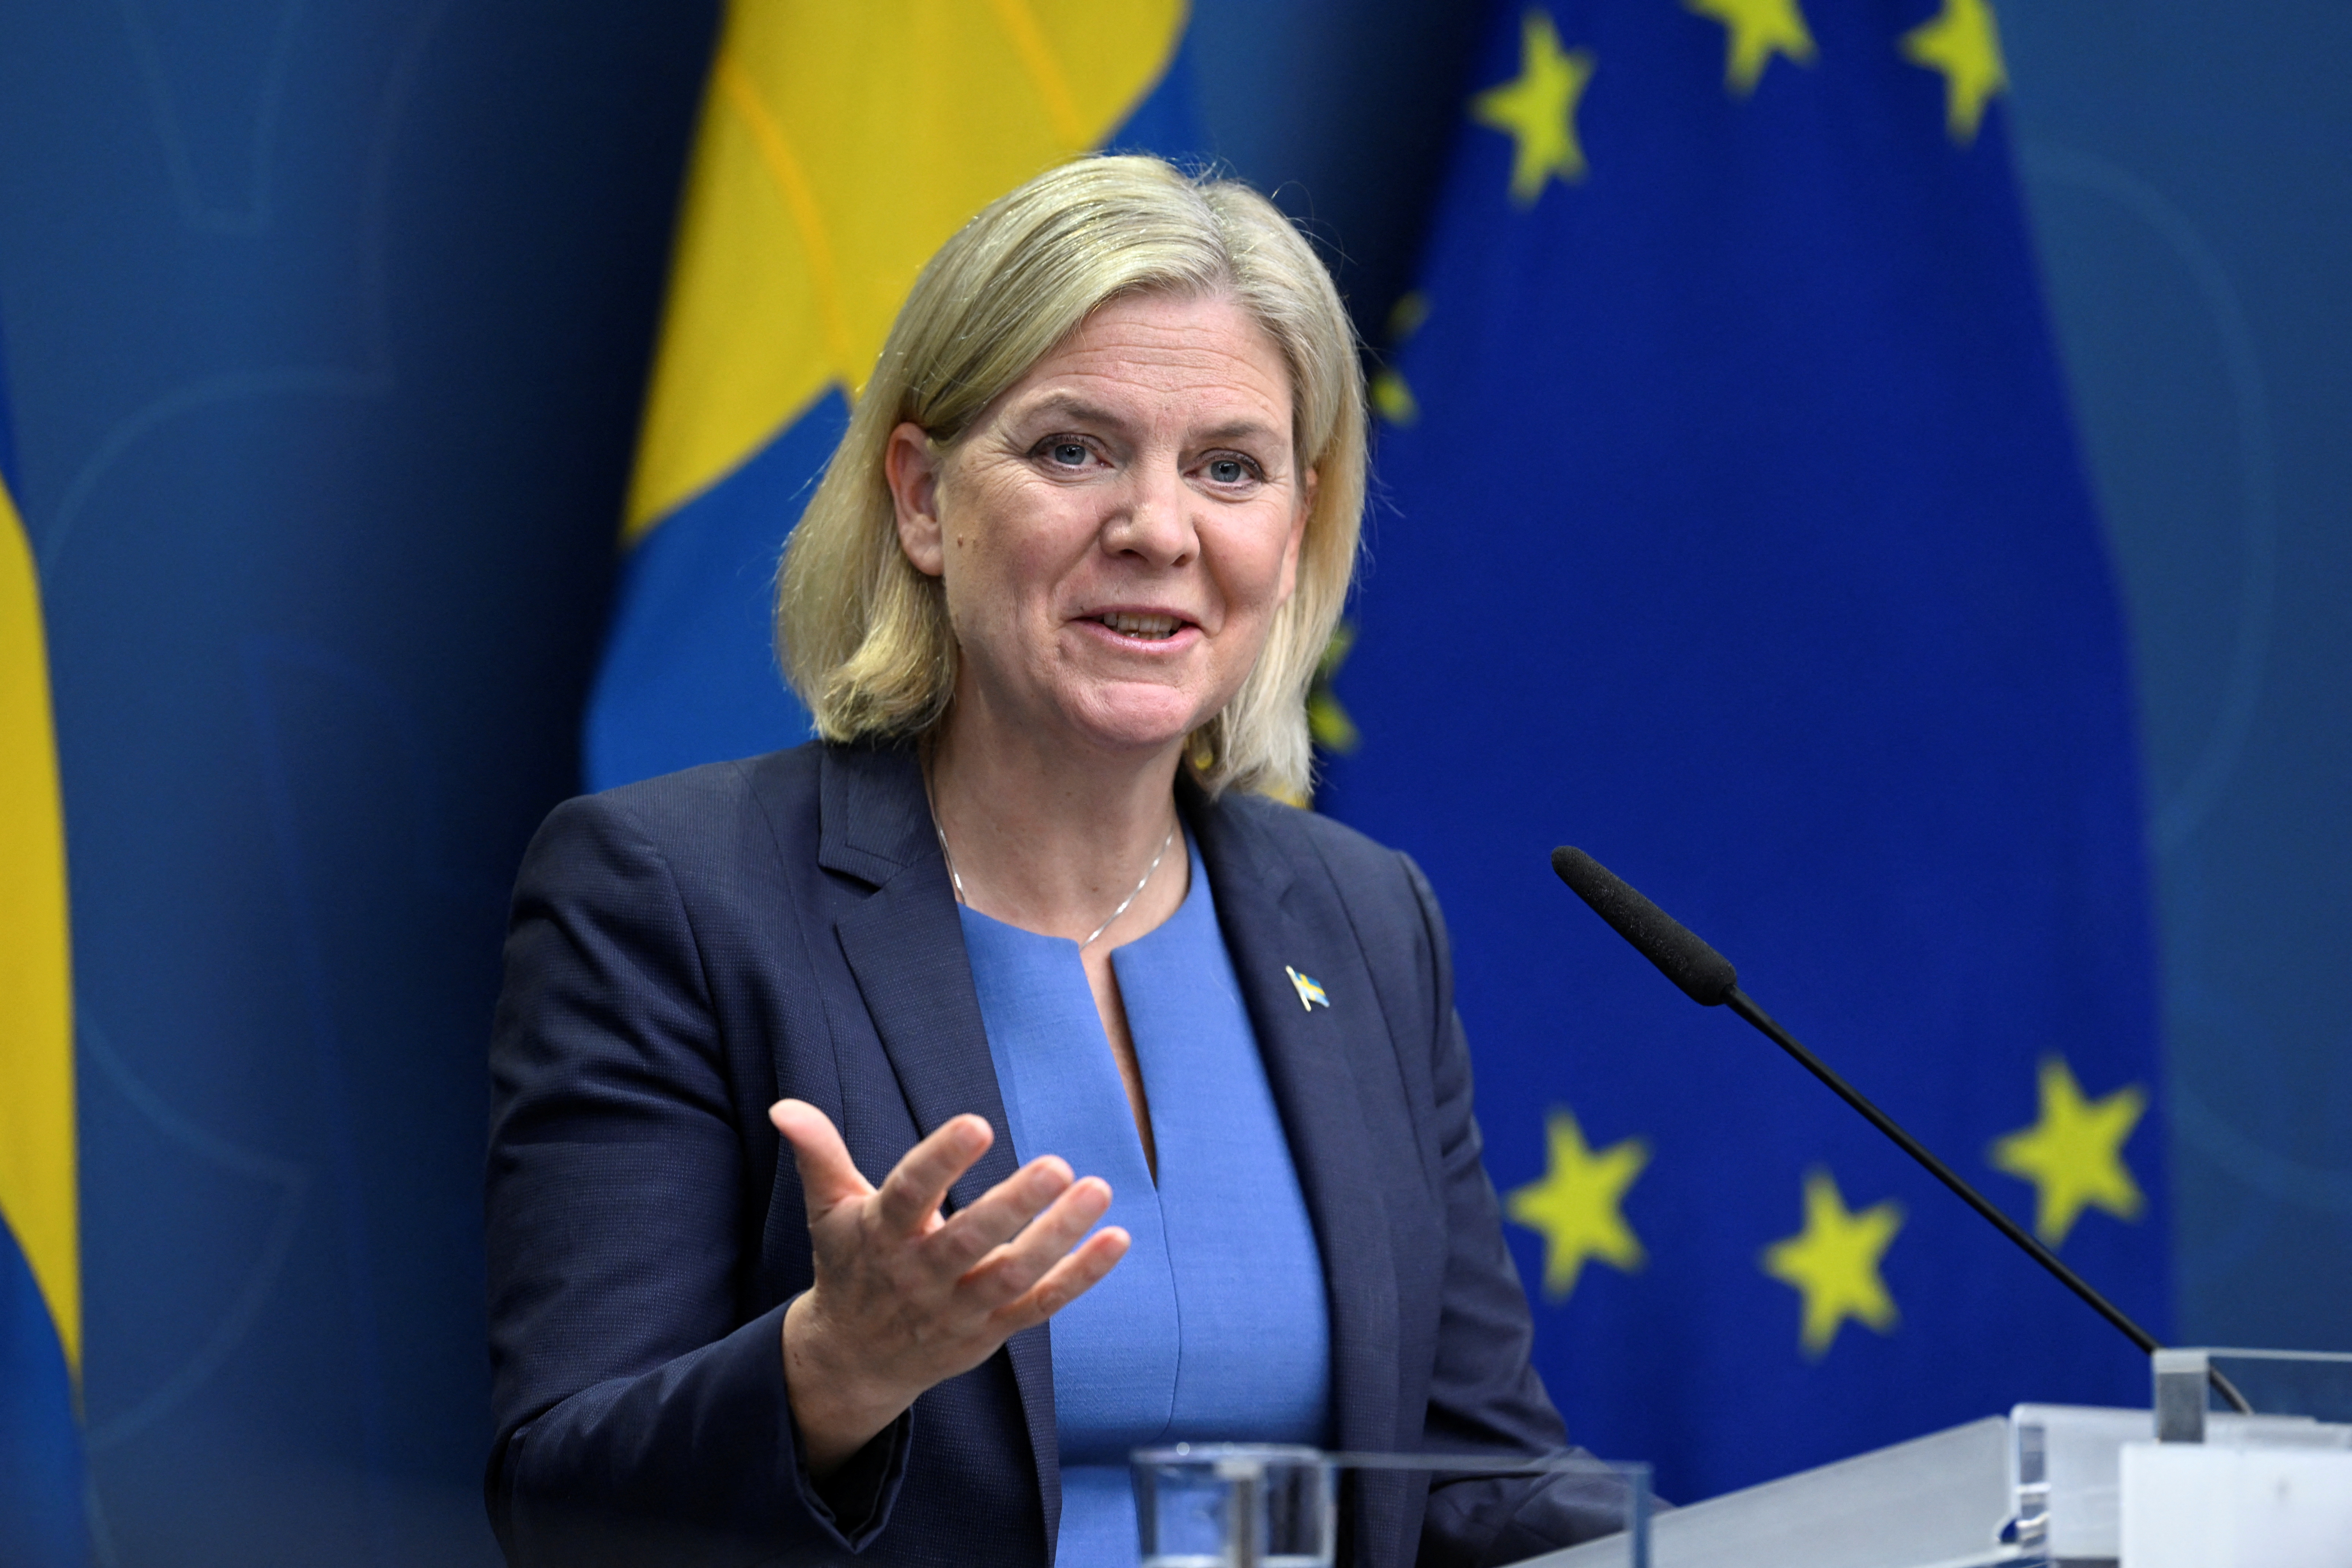 Swedish PM Andersson gives a news conference in Stockholm